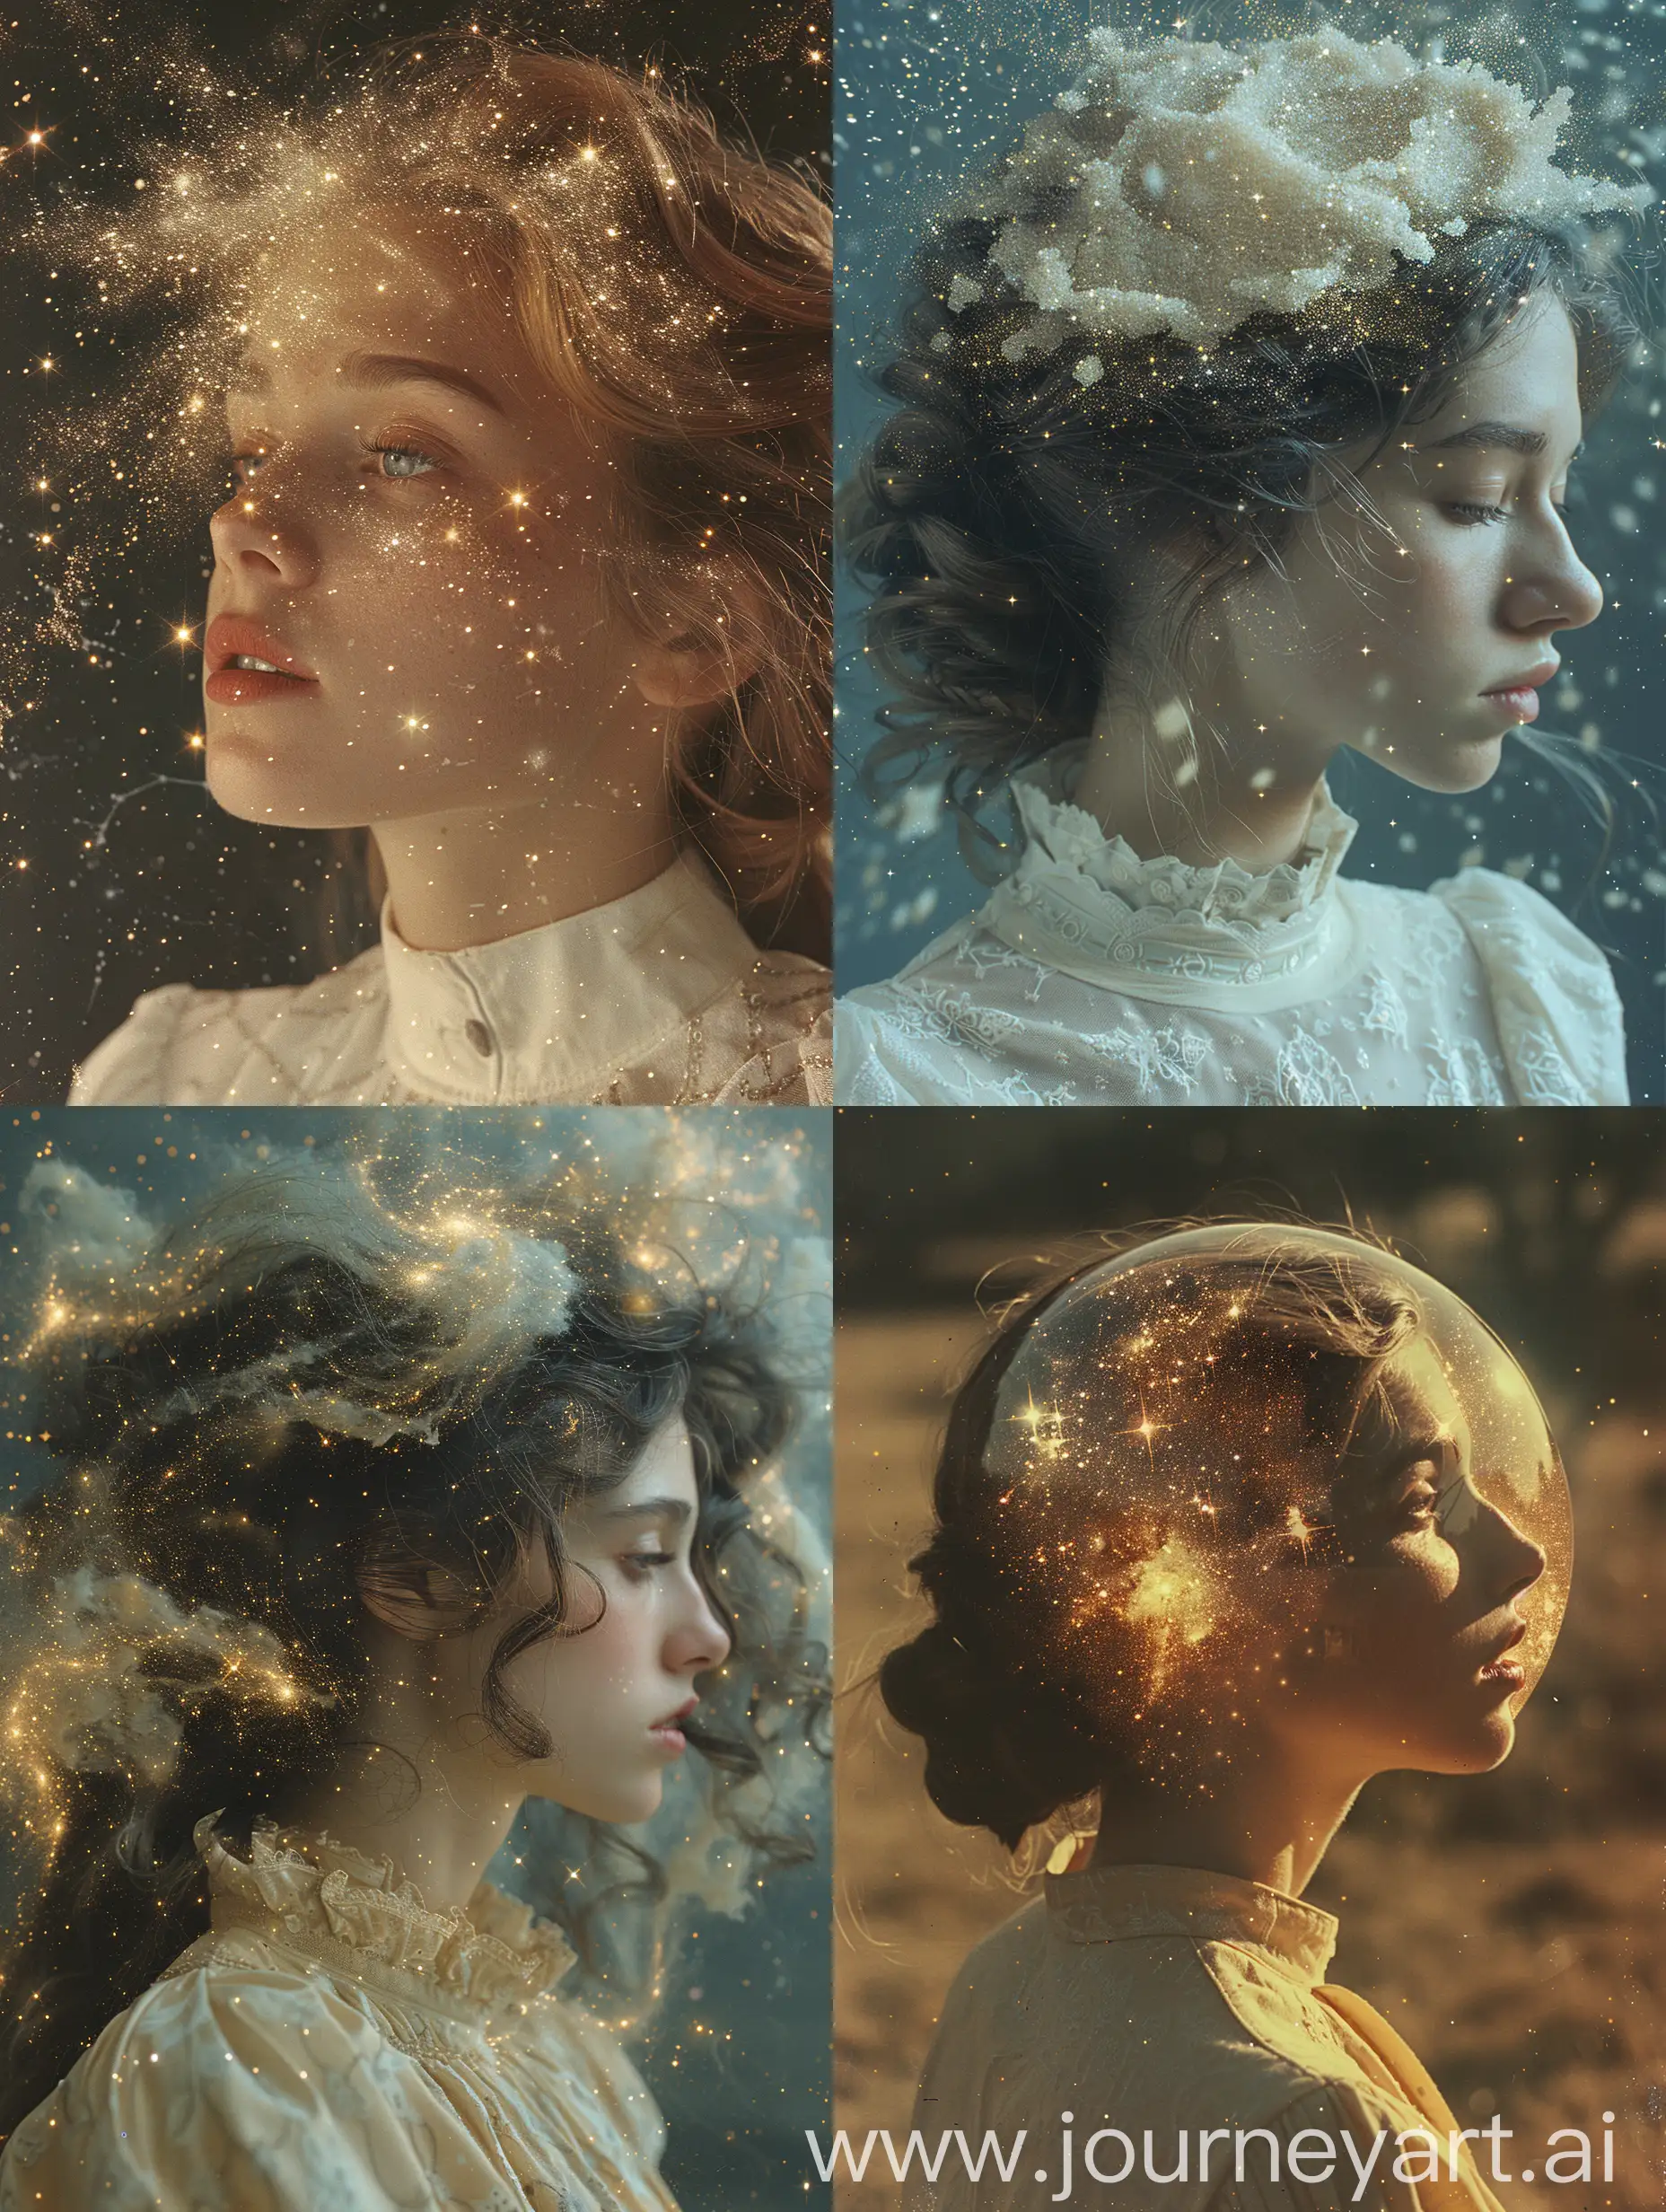 Starry-Enchantment-A-Womans-Ethereal-Embrace-Amid-Cosmic-Desolation